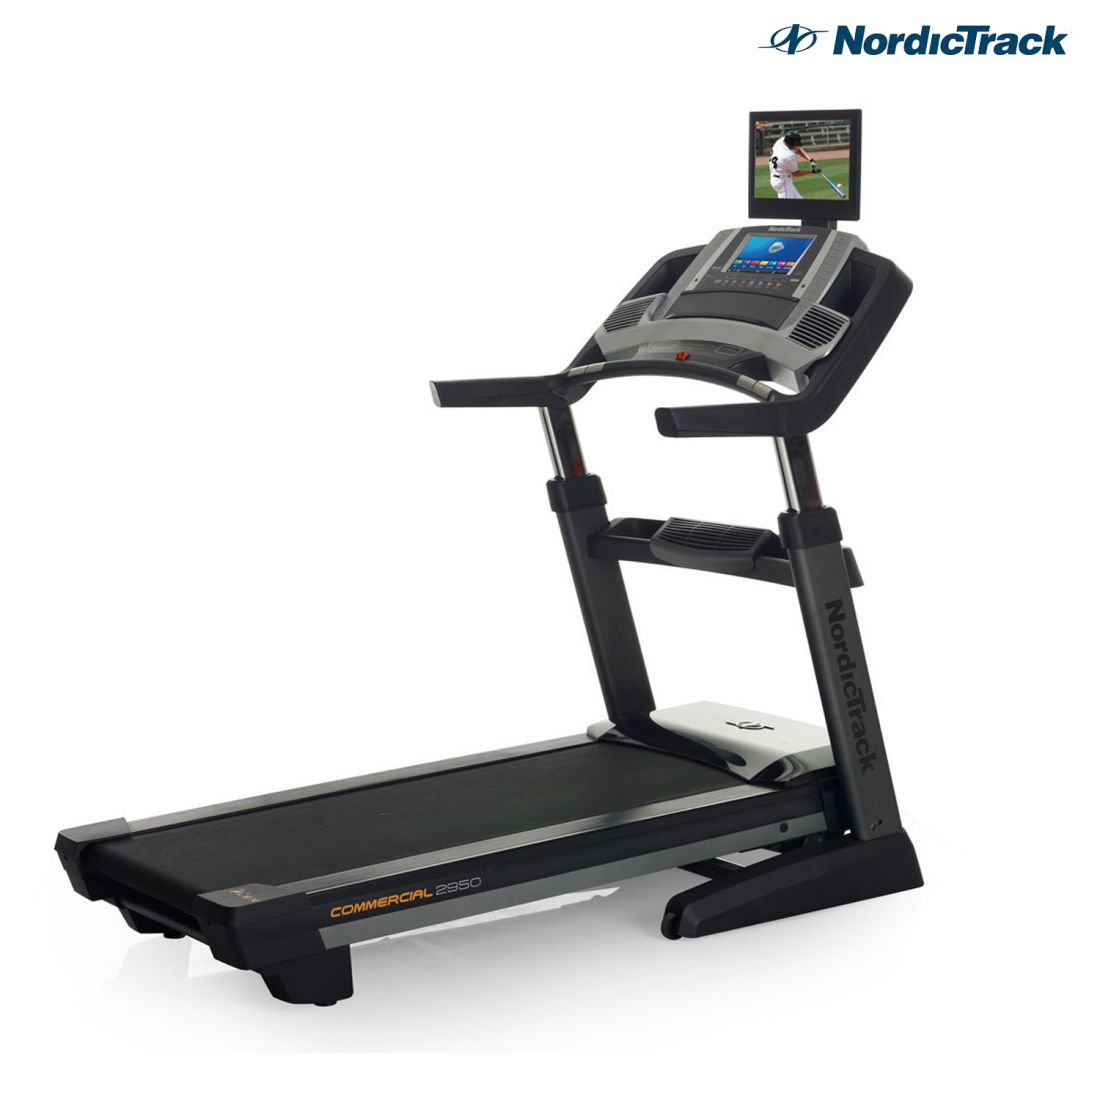 NordicTrack Commercial 2950